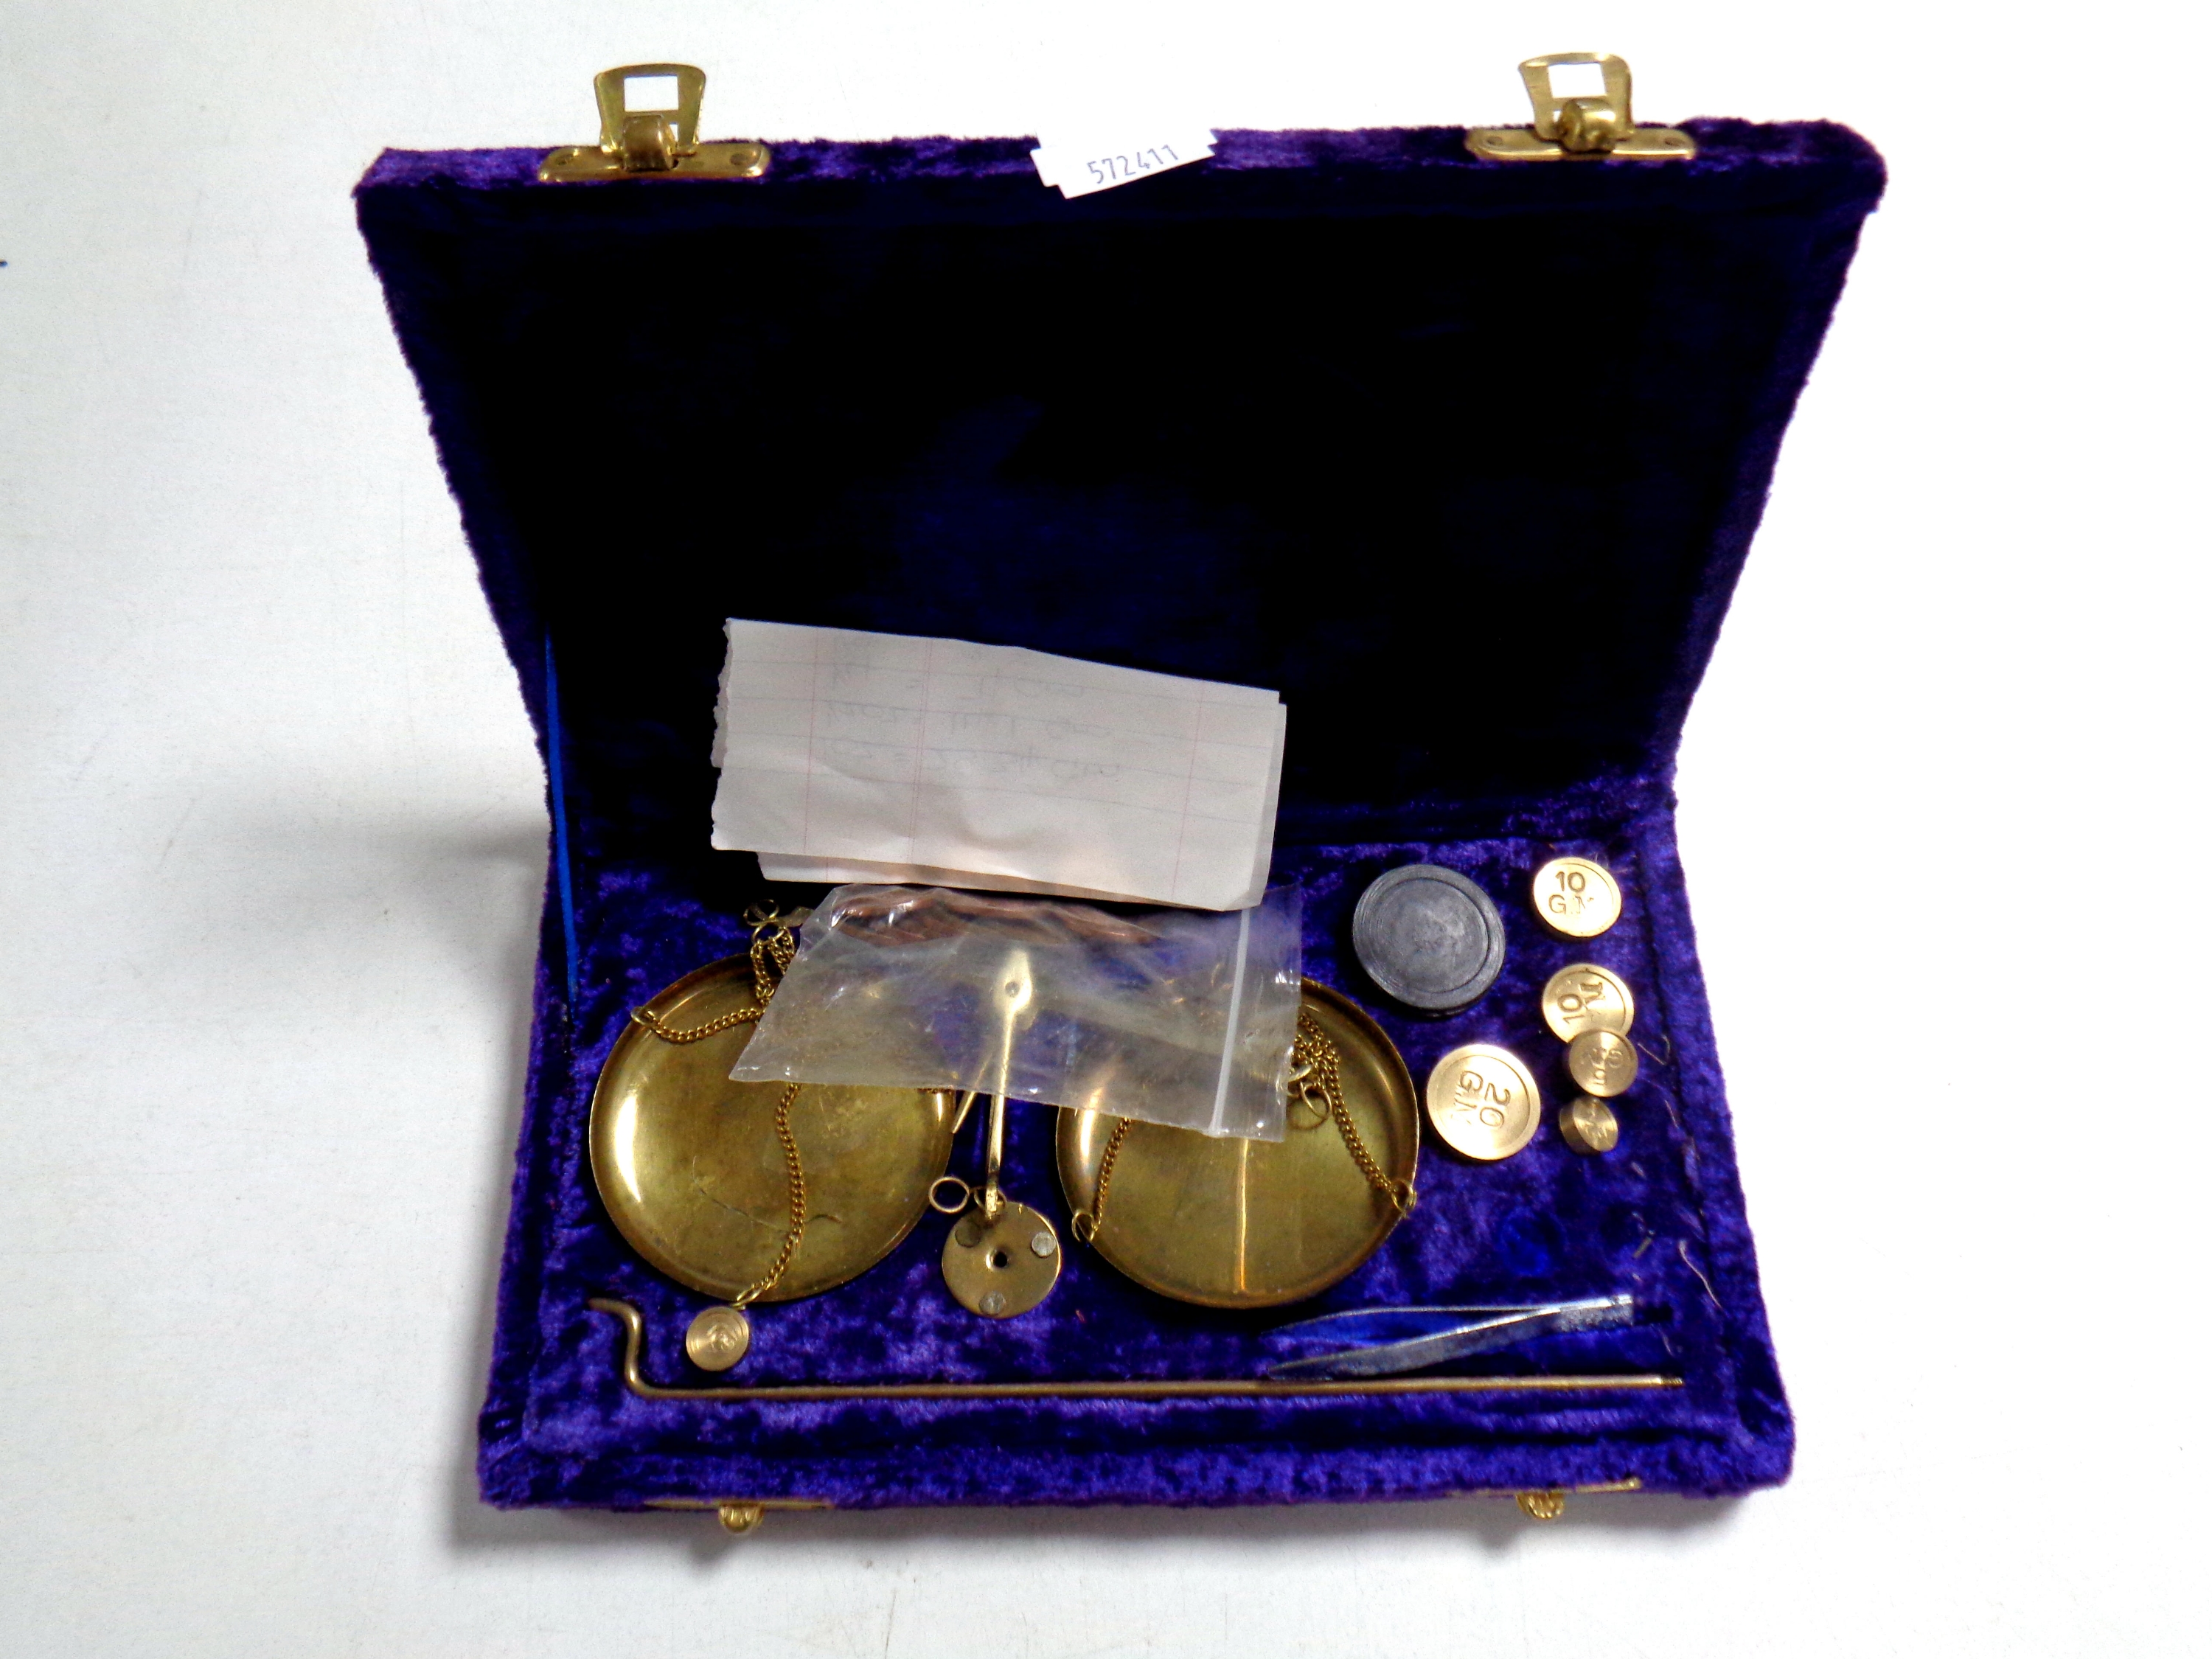 A set of miniature brass balance scales with weights in a fitted purple velvet box